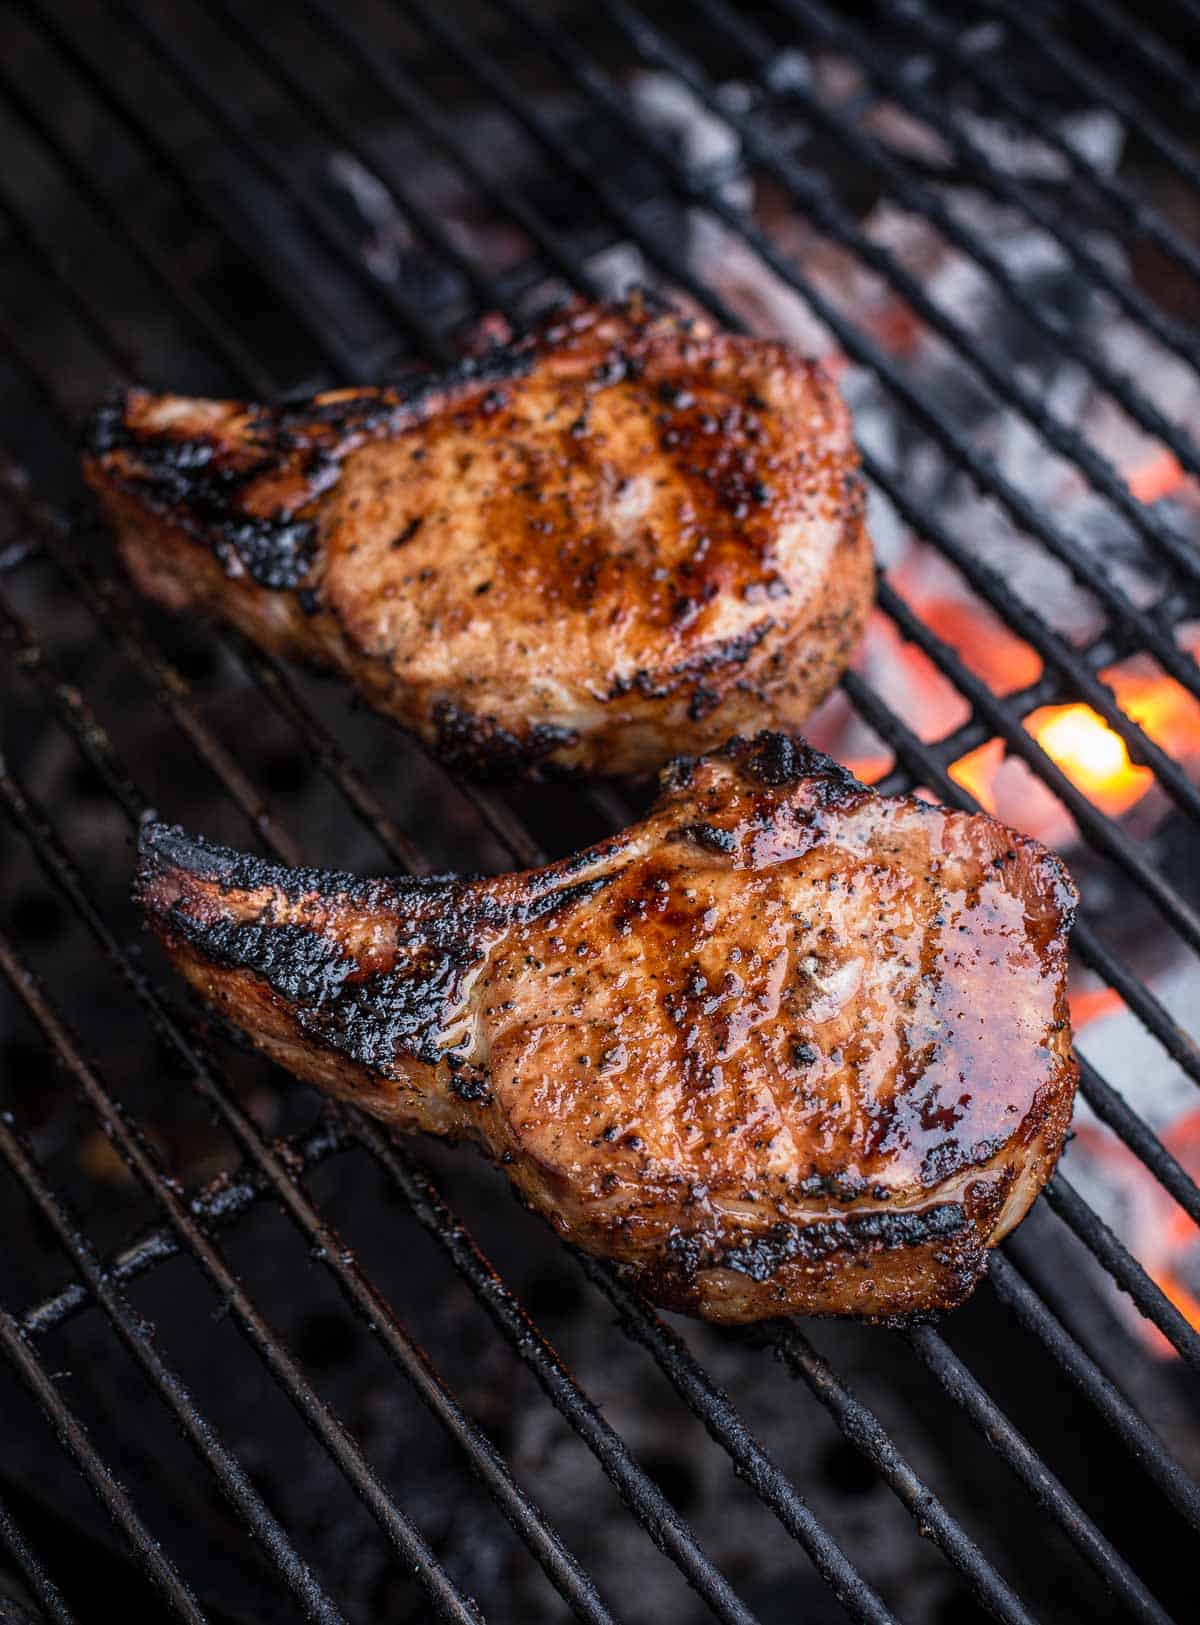 Marinated Pork Chops on the Grill